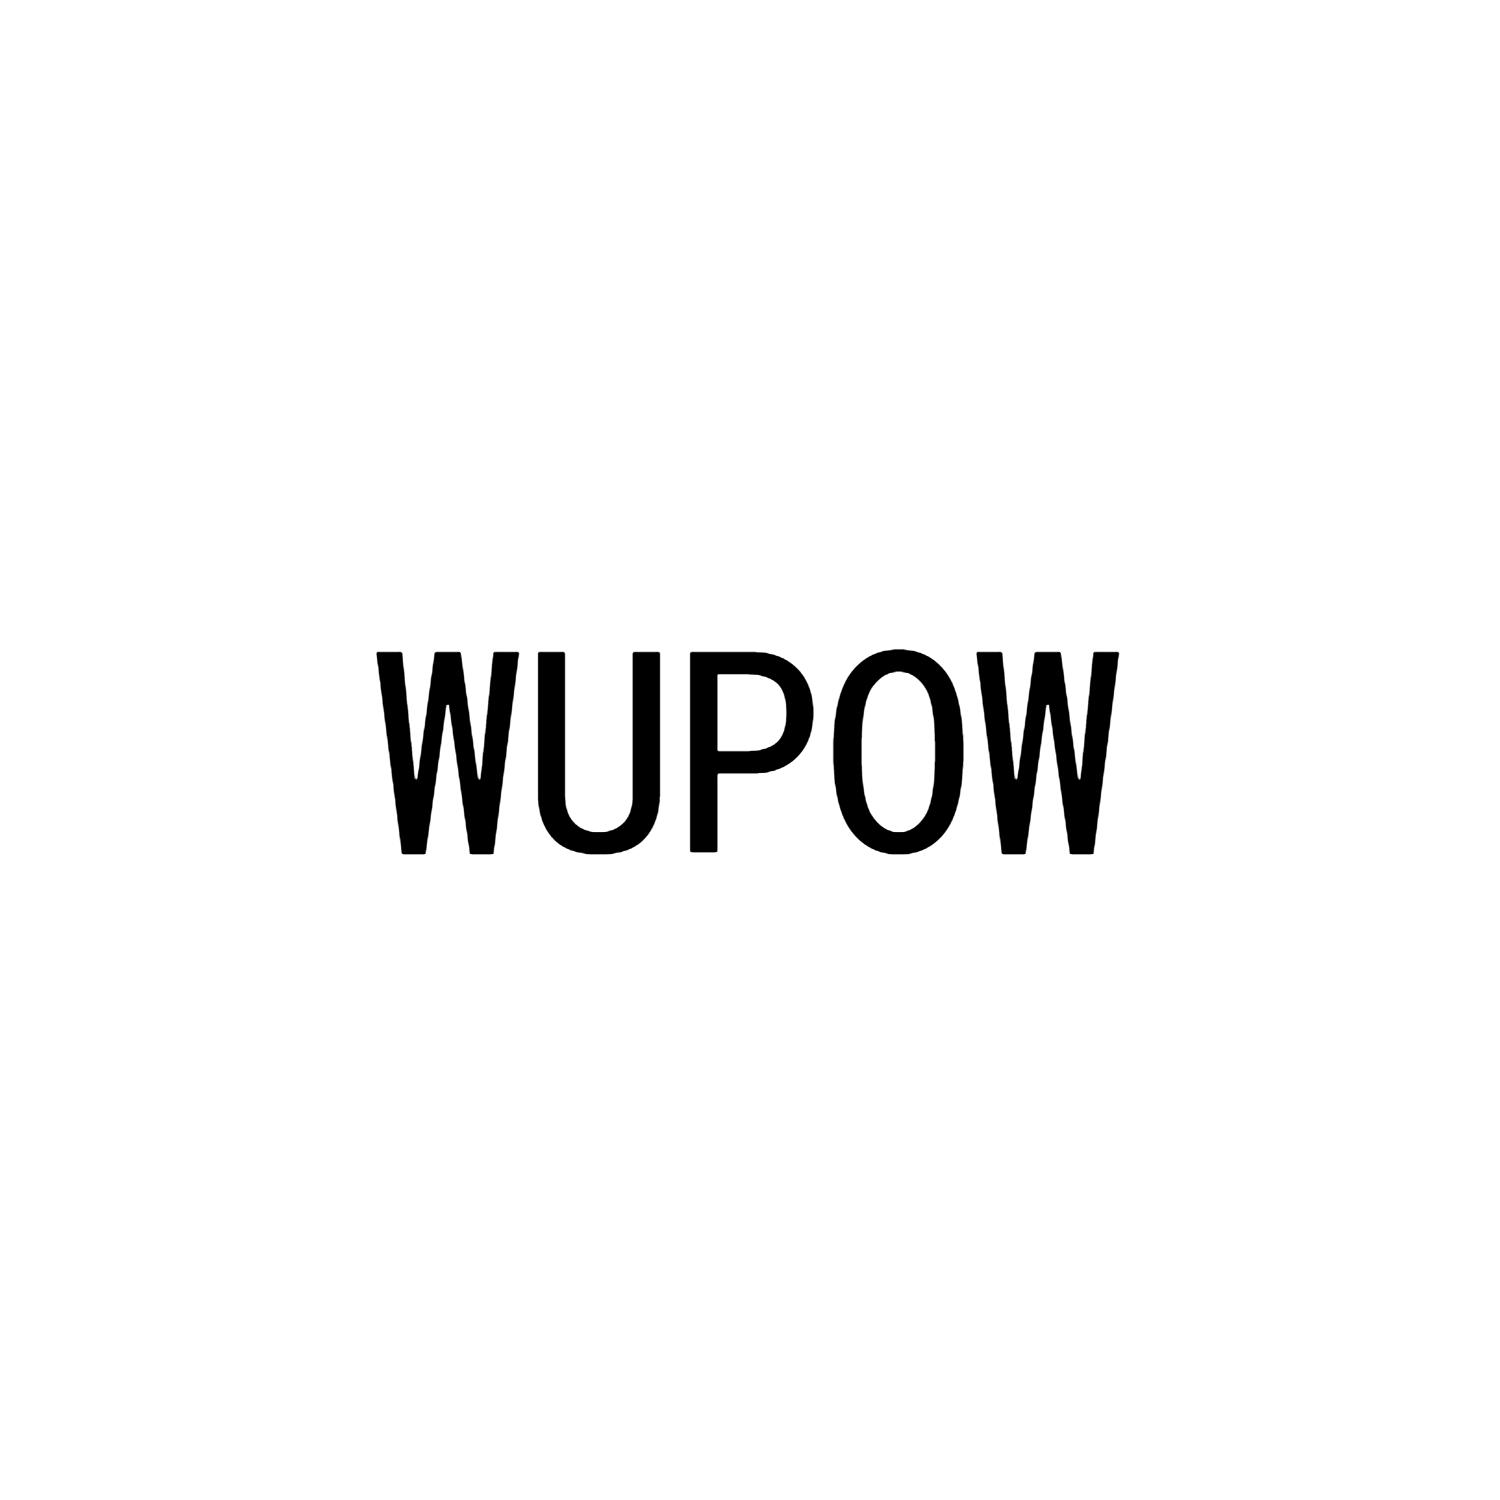 WUPOW